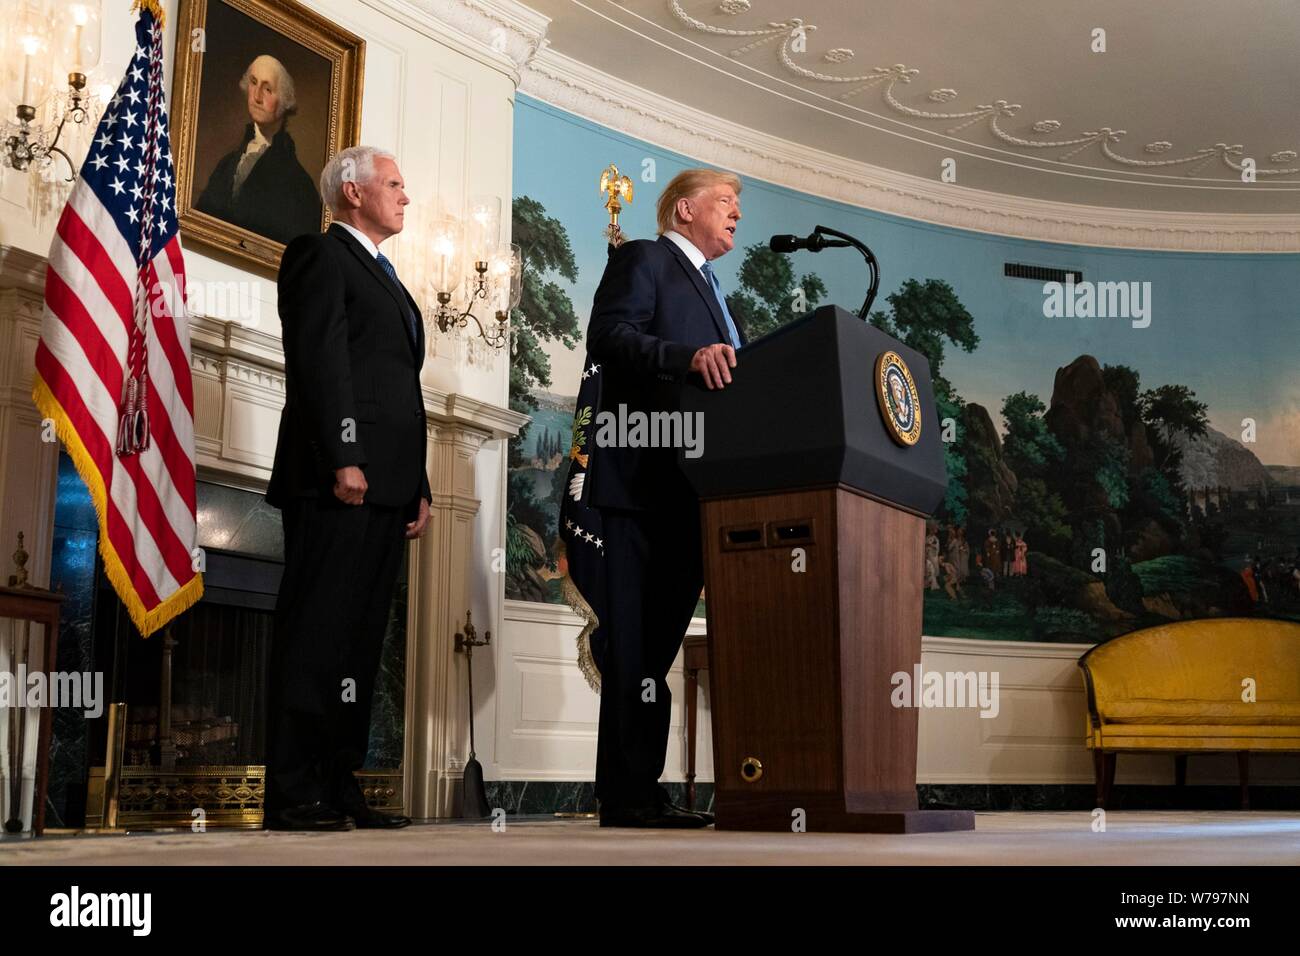 Washington, United States Of America. 05th Aug, 2019. U.S President Donald Trump joined by Vice President Mike Pence, left, delivers remarks on the mass shootings in El Paso and Dayton from the Diplomatic Reception Room of the White House August 5, 2019 in Washington, DC. Credit: Planetpix/Alamy Live News Stock Photo